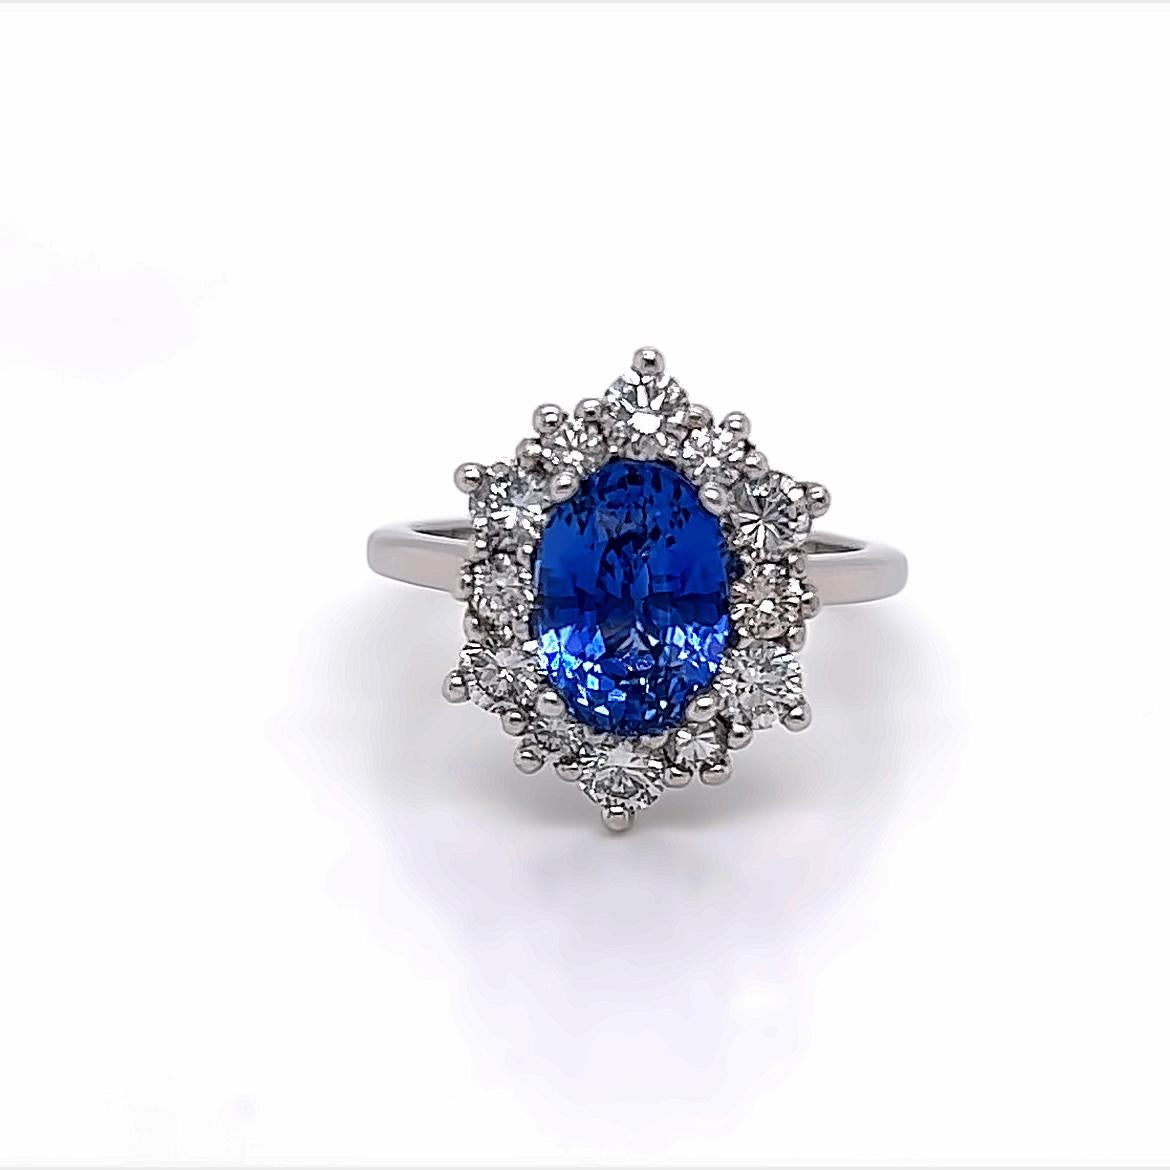 This spectacular ring features an oval cut 3.1 carat Blue Sapphire at its centre, surrounded by an iridescent arrangement of 12 glittering diamonds, all held together on a Platinum band.

The Blue Sapphire at the centre of this ring is a uniquely